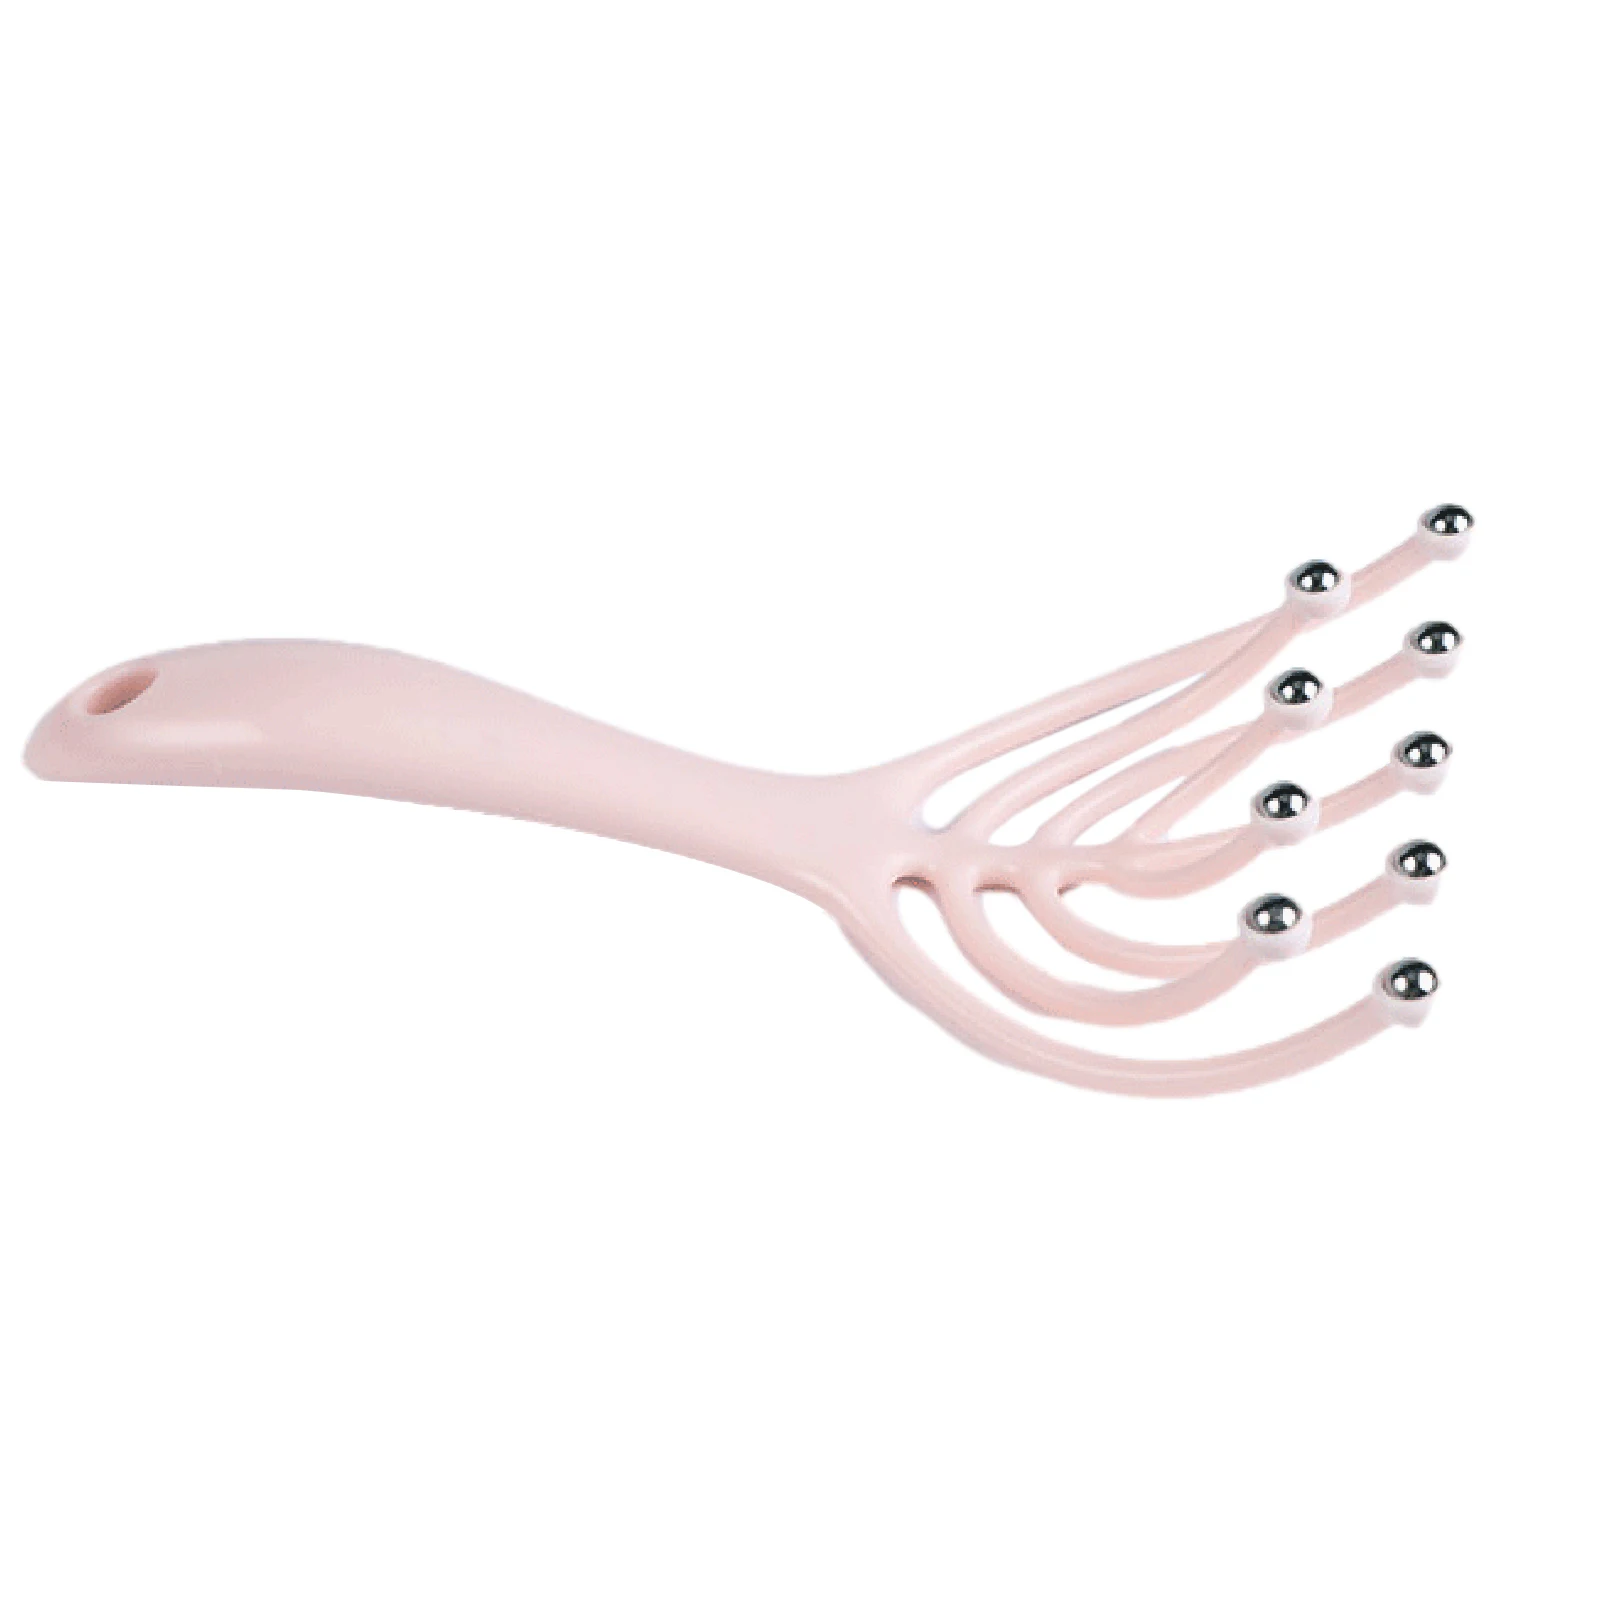 

9-Claw Scalp Massager Portable Hair Massagers With 9 Claws Deep Relaxation & Stress Reduction In The Office Home Father's Day